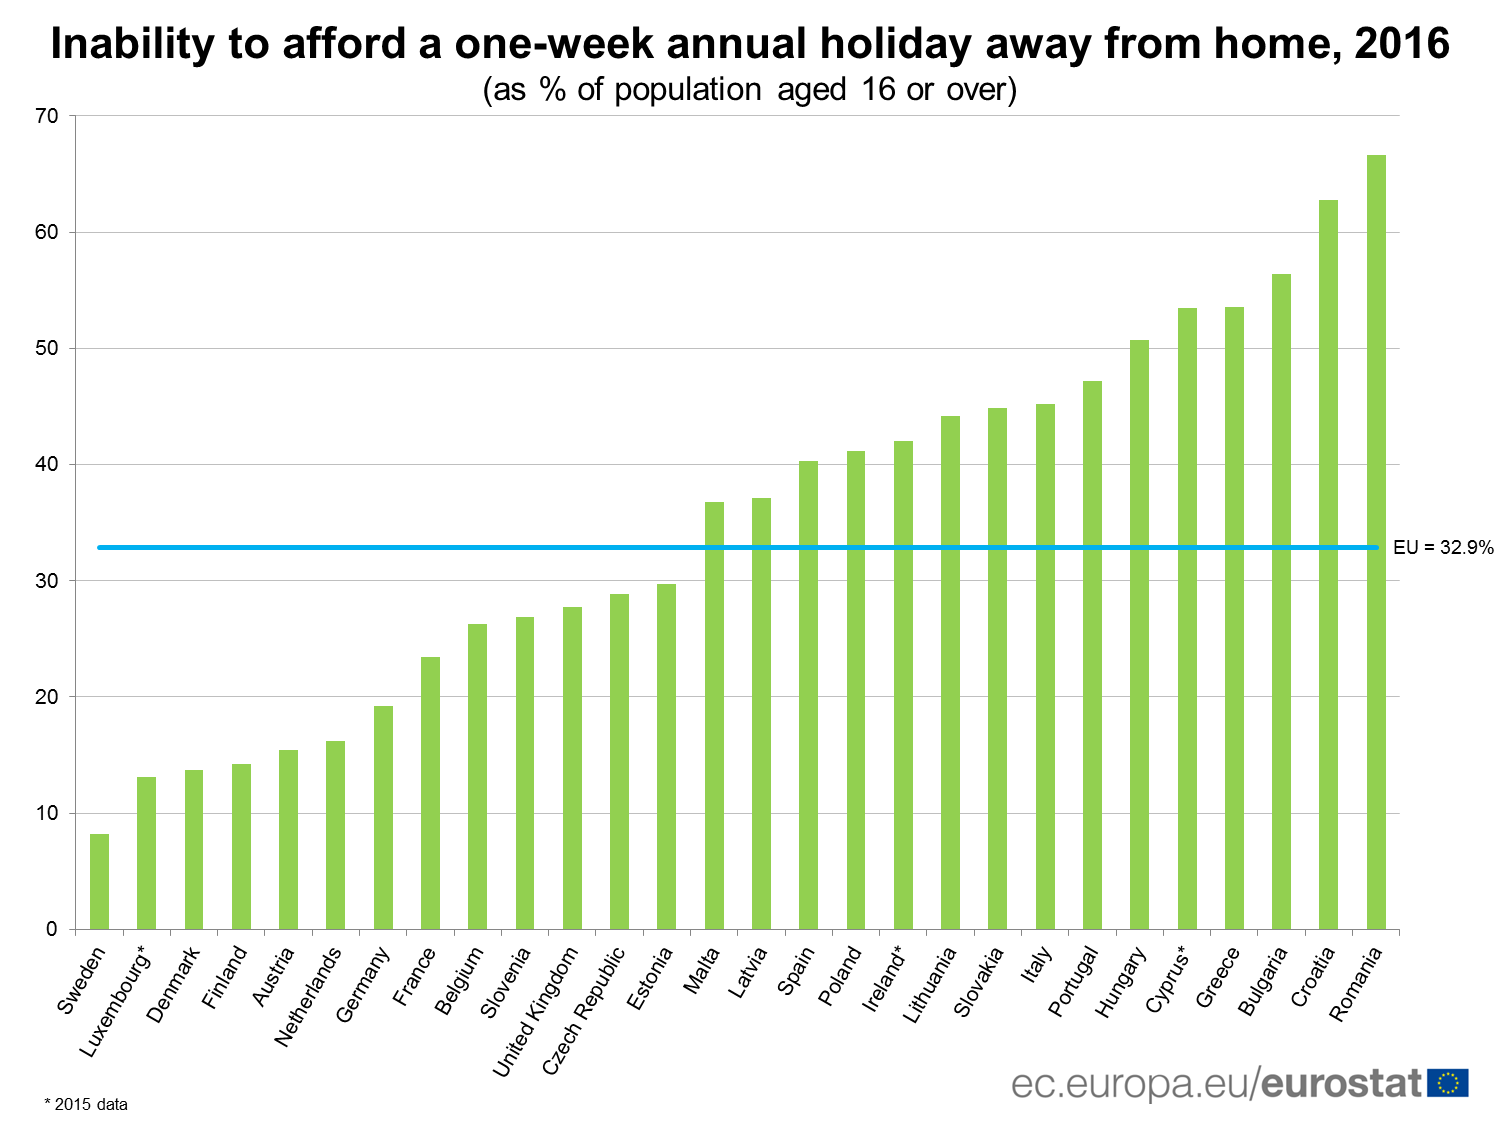 eurostat_cannot_afford_holiday_2016.png